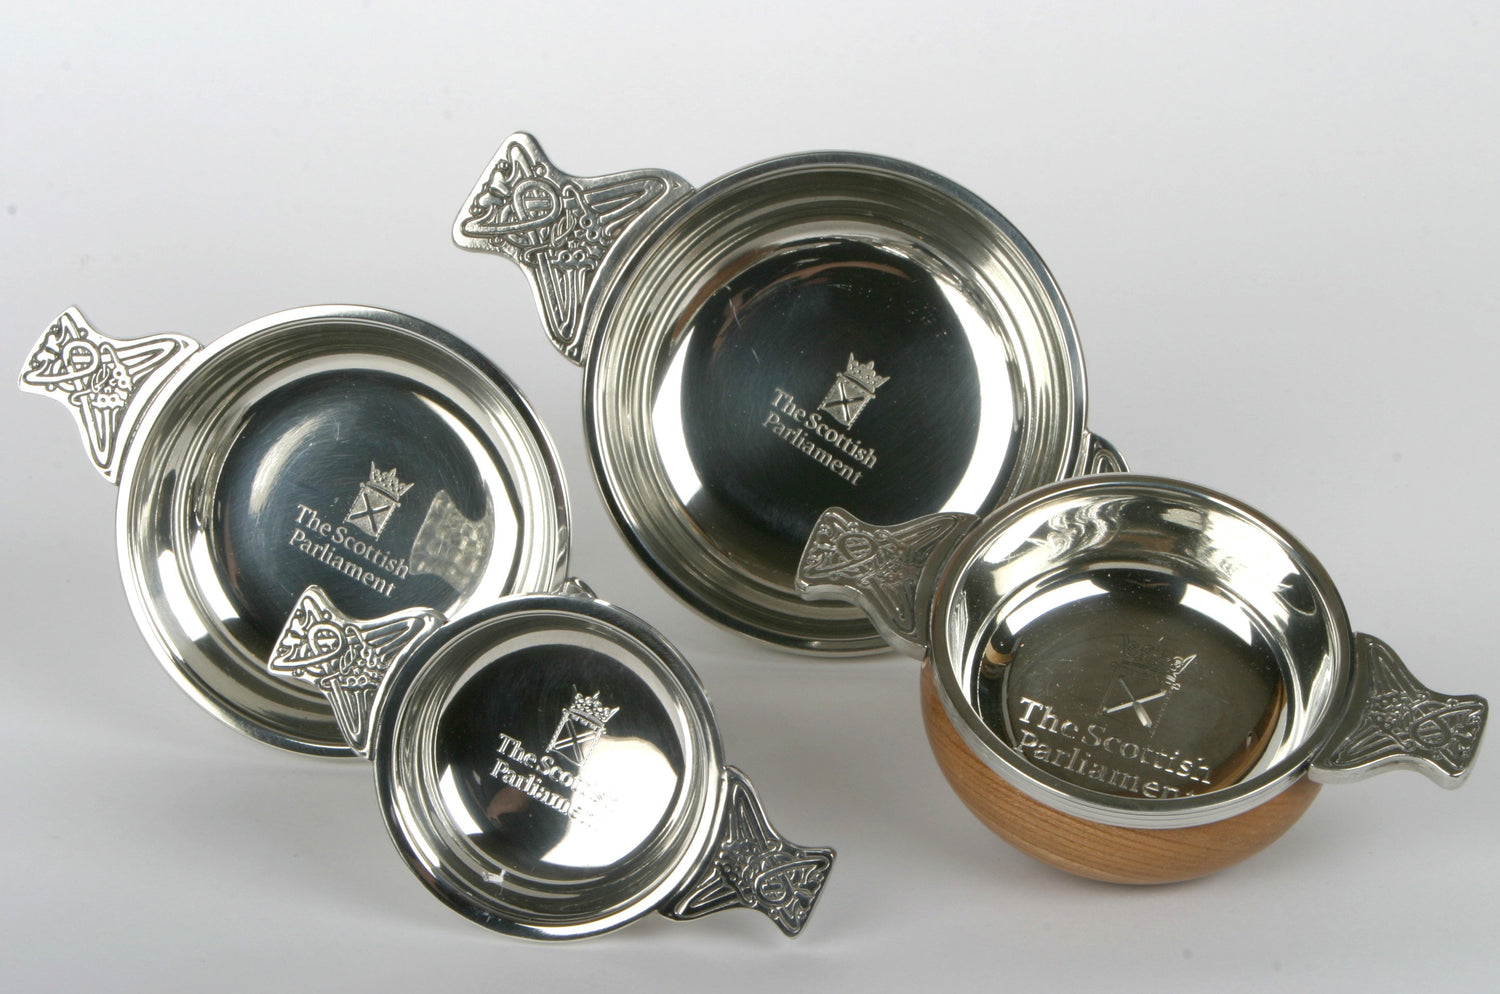 Four quaichs in different sizes, engraved with the symbol of the Scottish Parliament.